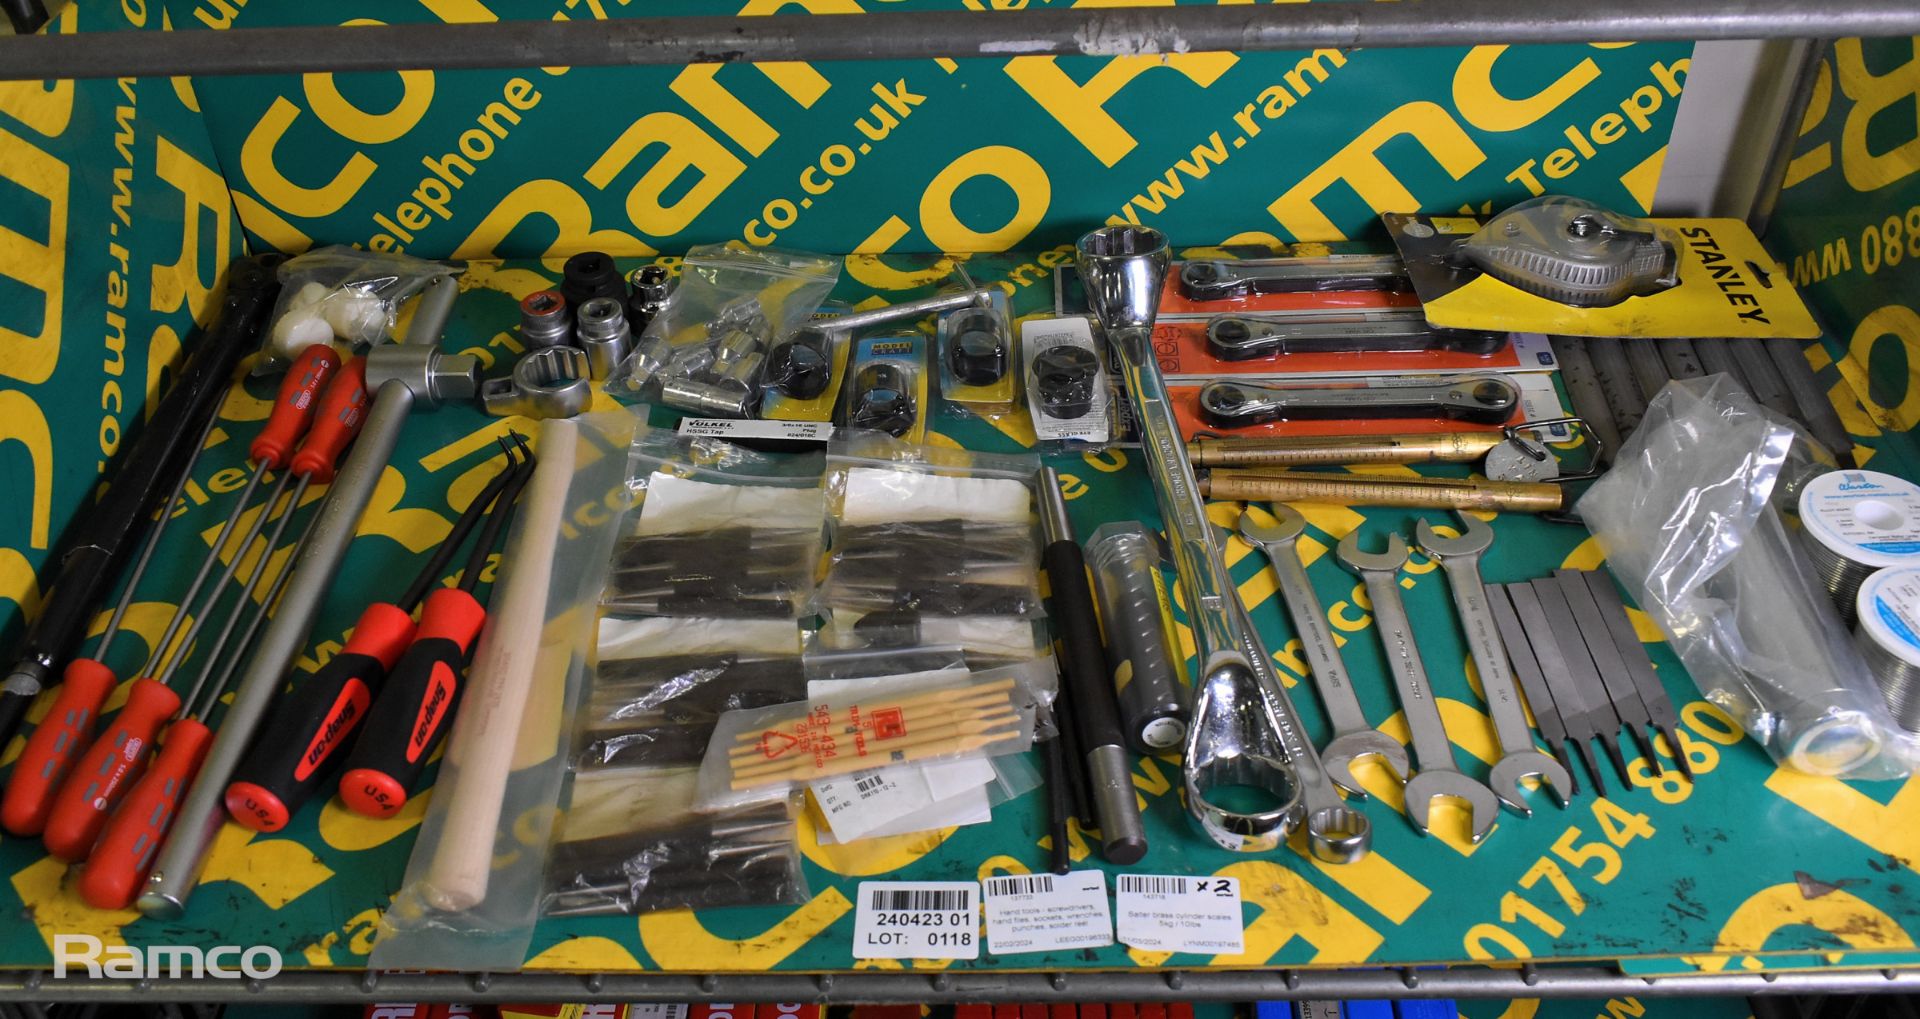 Hand tools - screwdrivers, hand files, sockets, wrenches, punches, solder reel & more